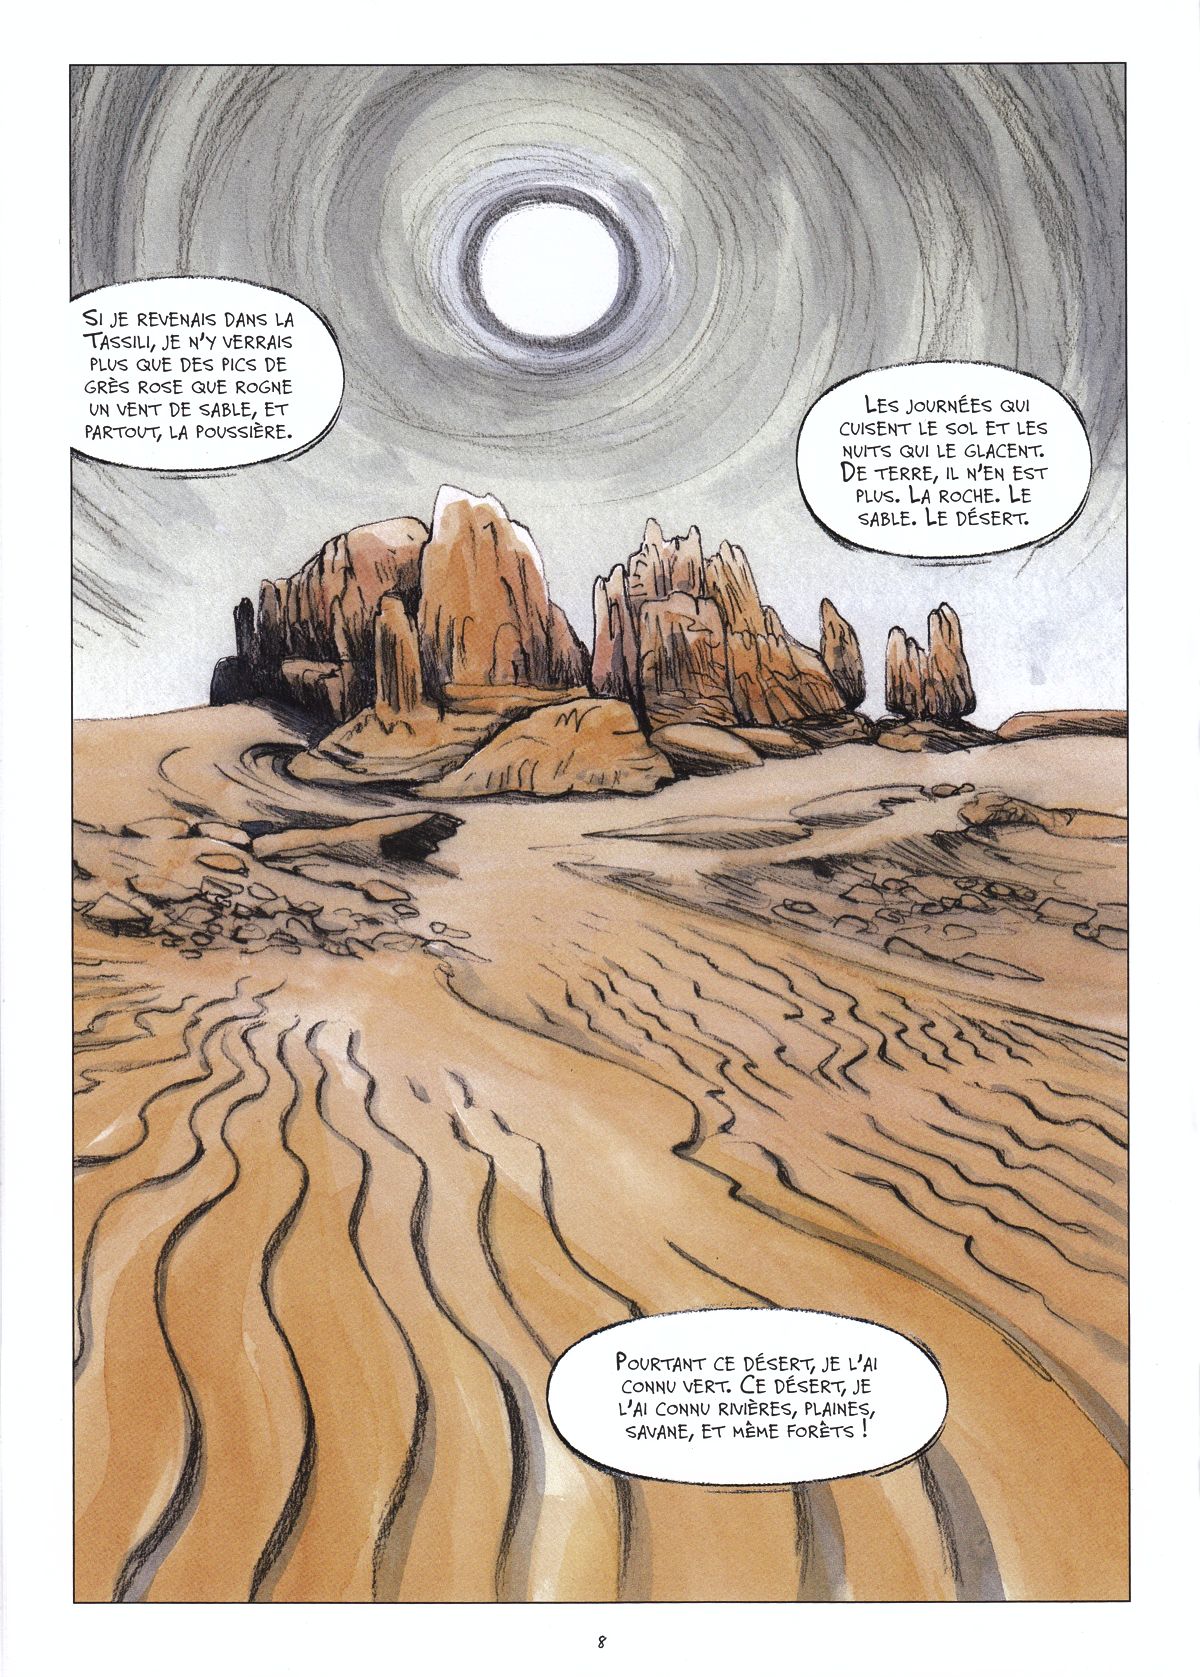 Page from the comic book « Tassili, une femme libre au Néolithique » by Maadiar and Fréwé, showing the Sahara as it stands today: a mineral maze having undergone « érosion pachydermique » making its sandstone rocks look like elephant skin.